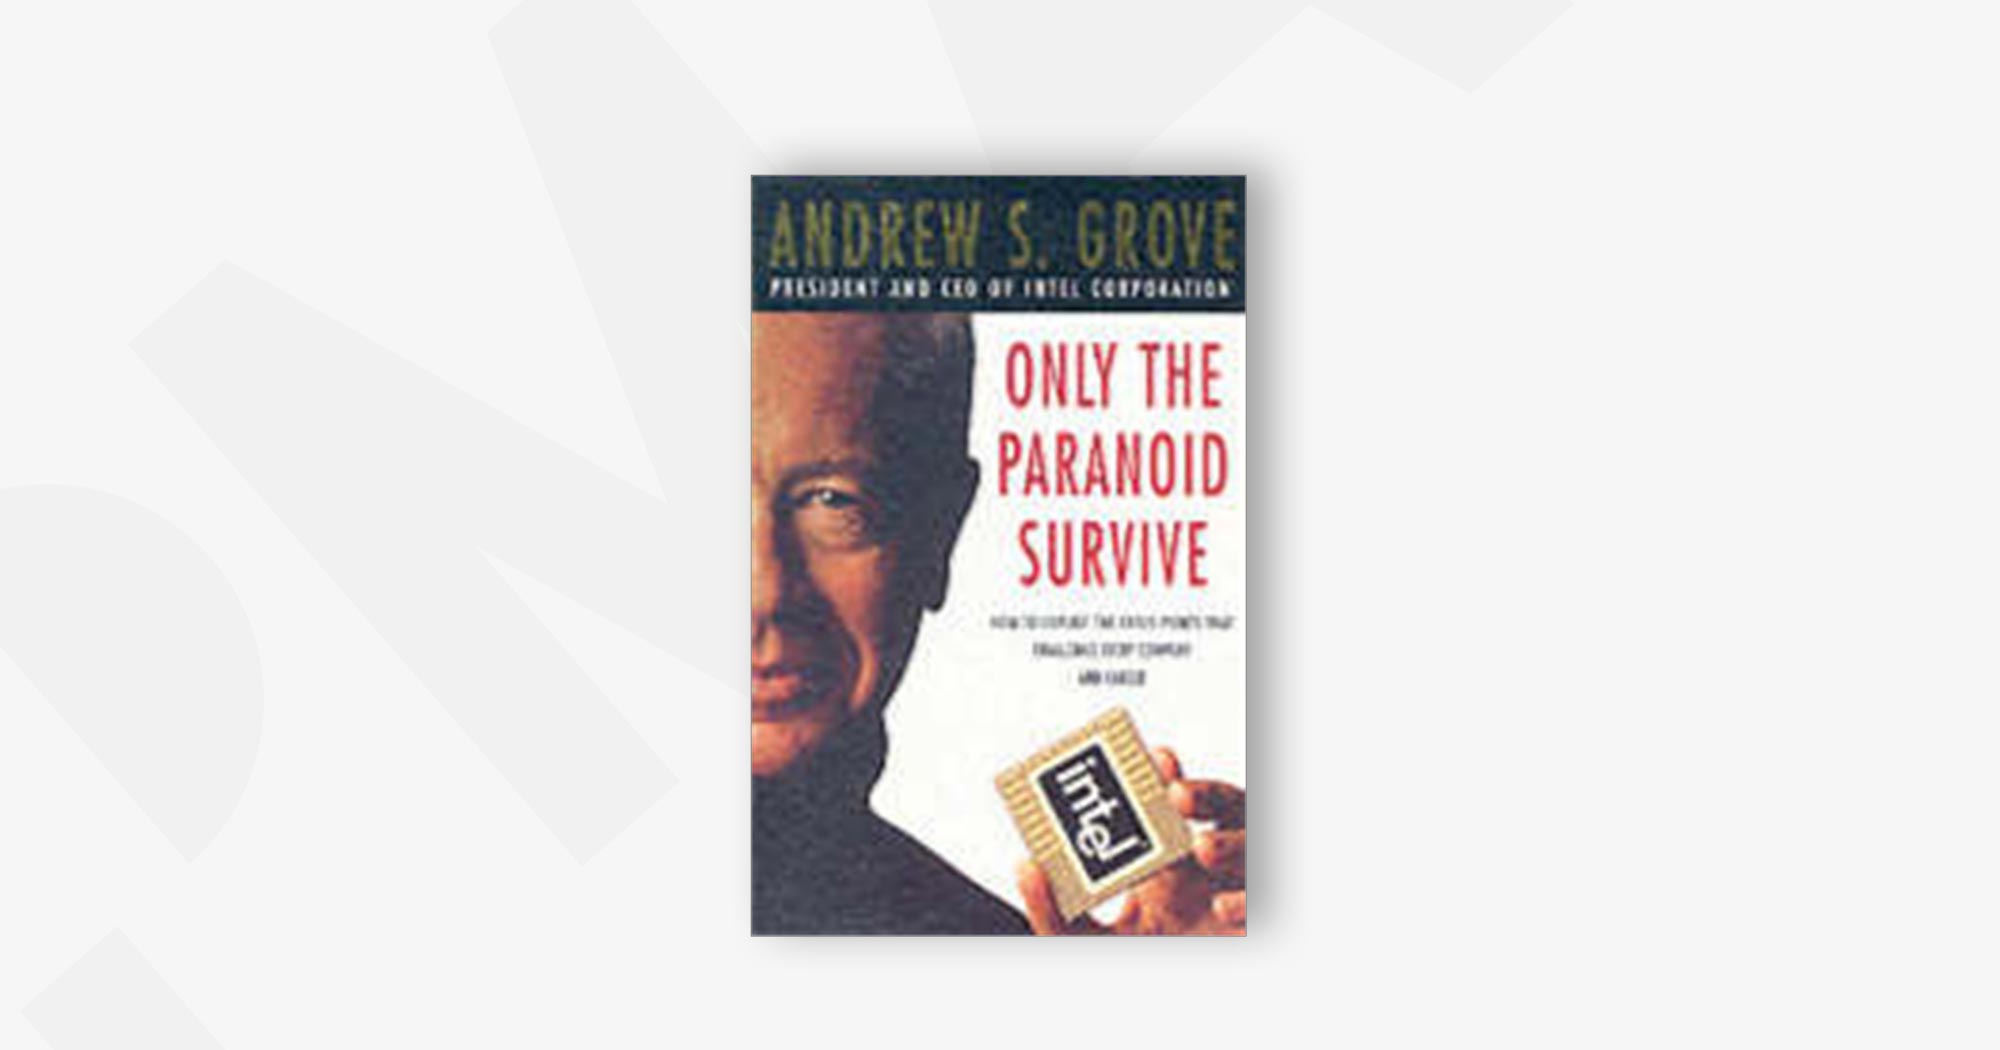  Only the Paranoid Survive – Andy Grove